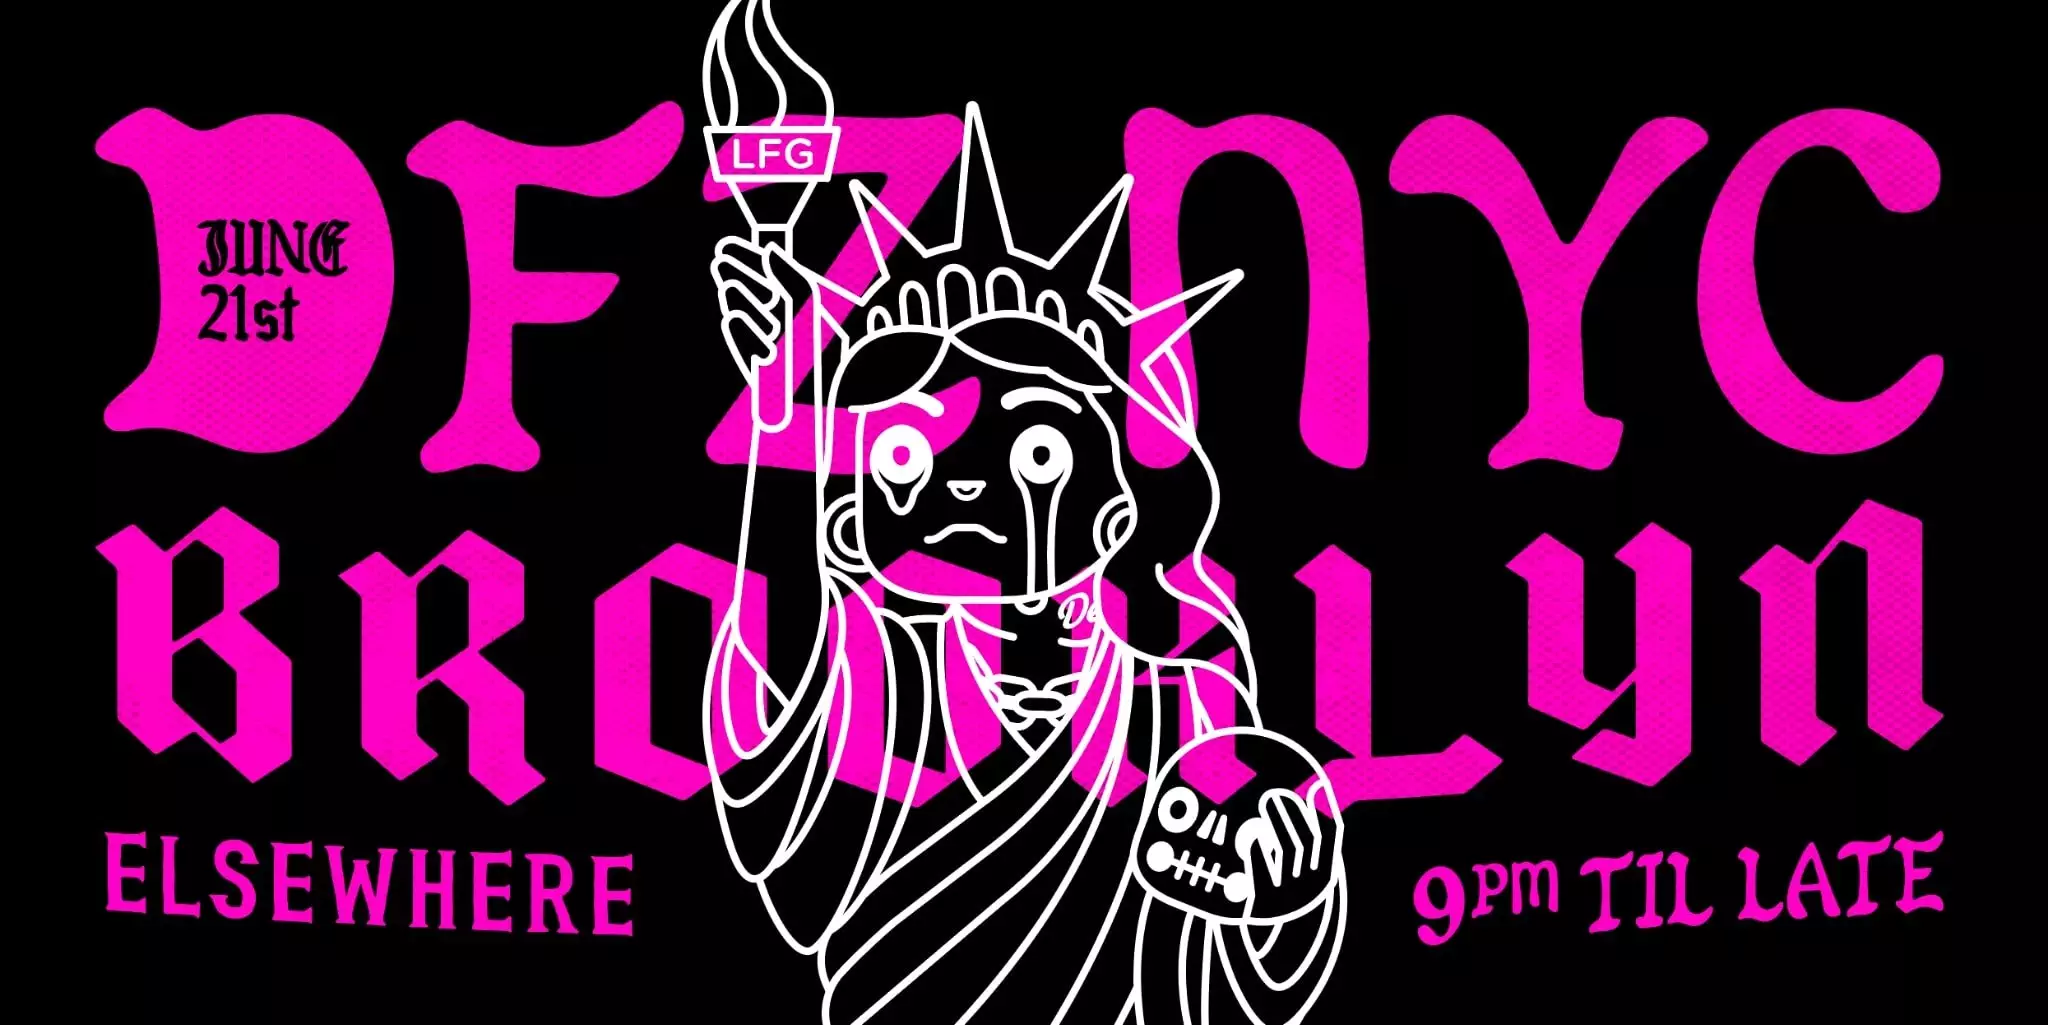 Deadfellaz Horde NFT.NYC party poster in neon pink